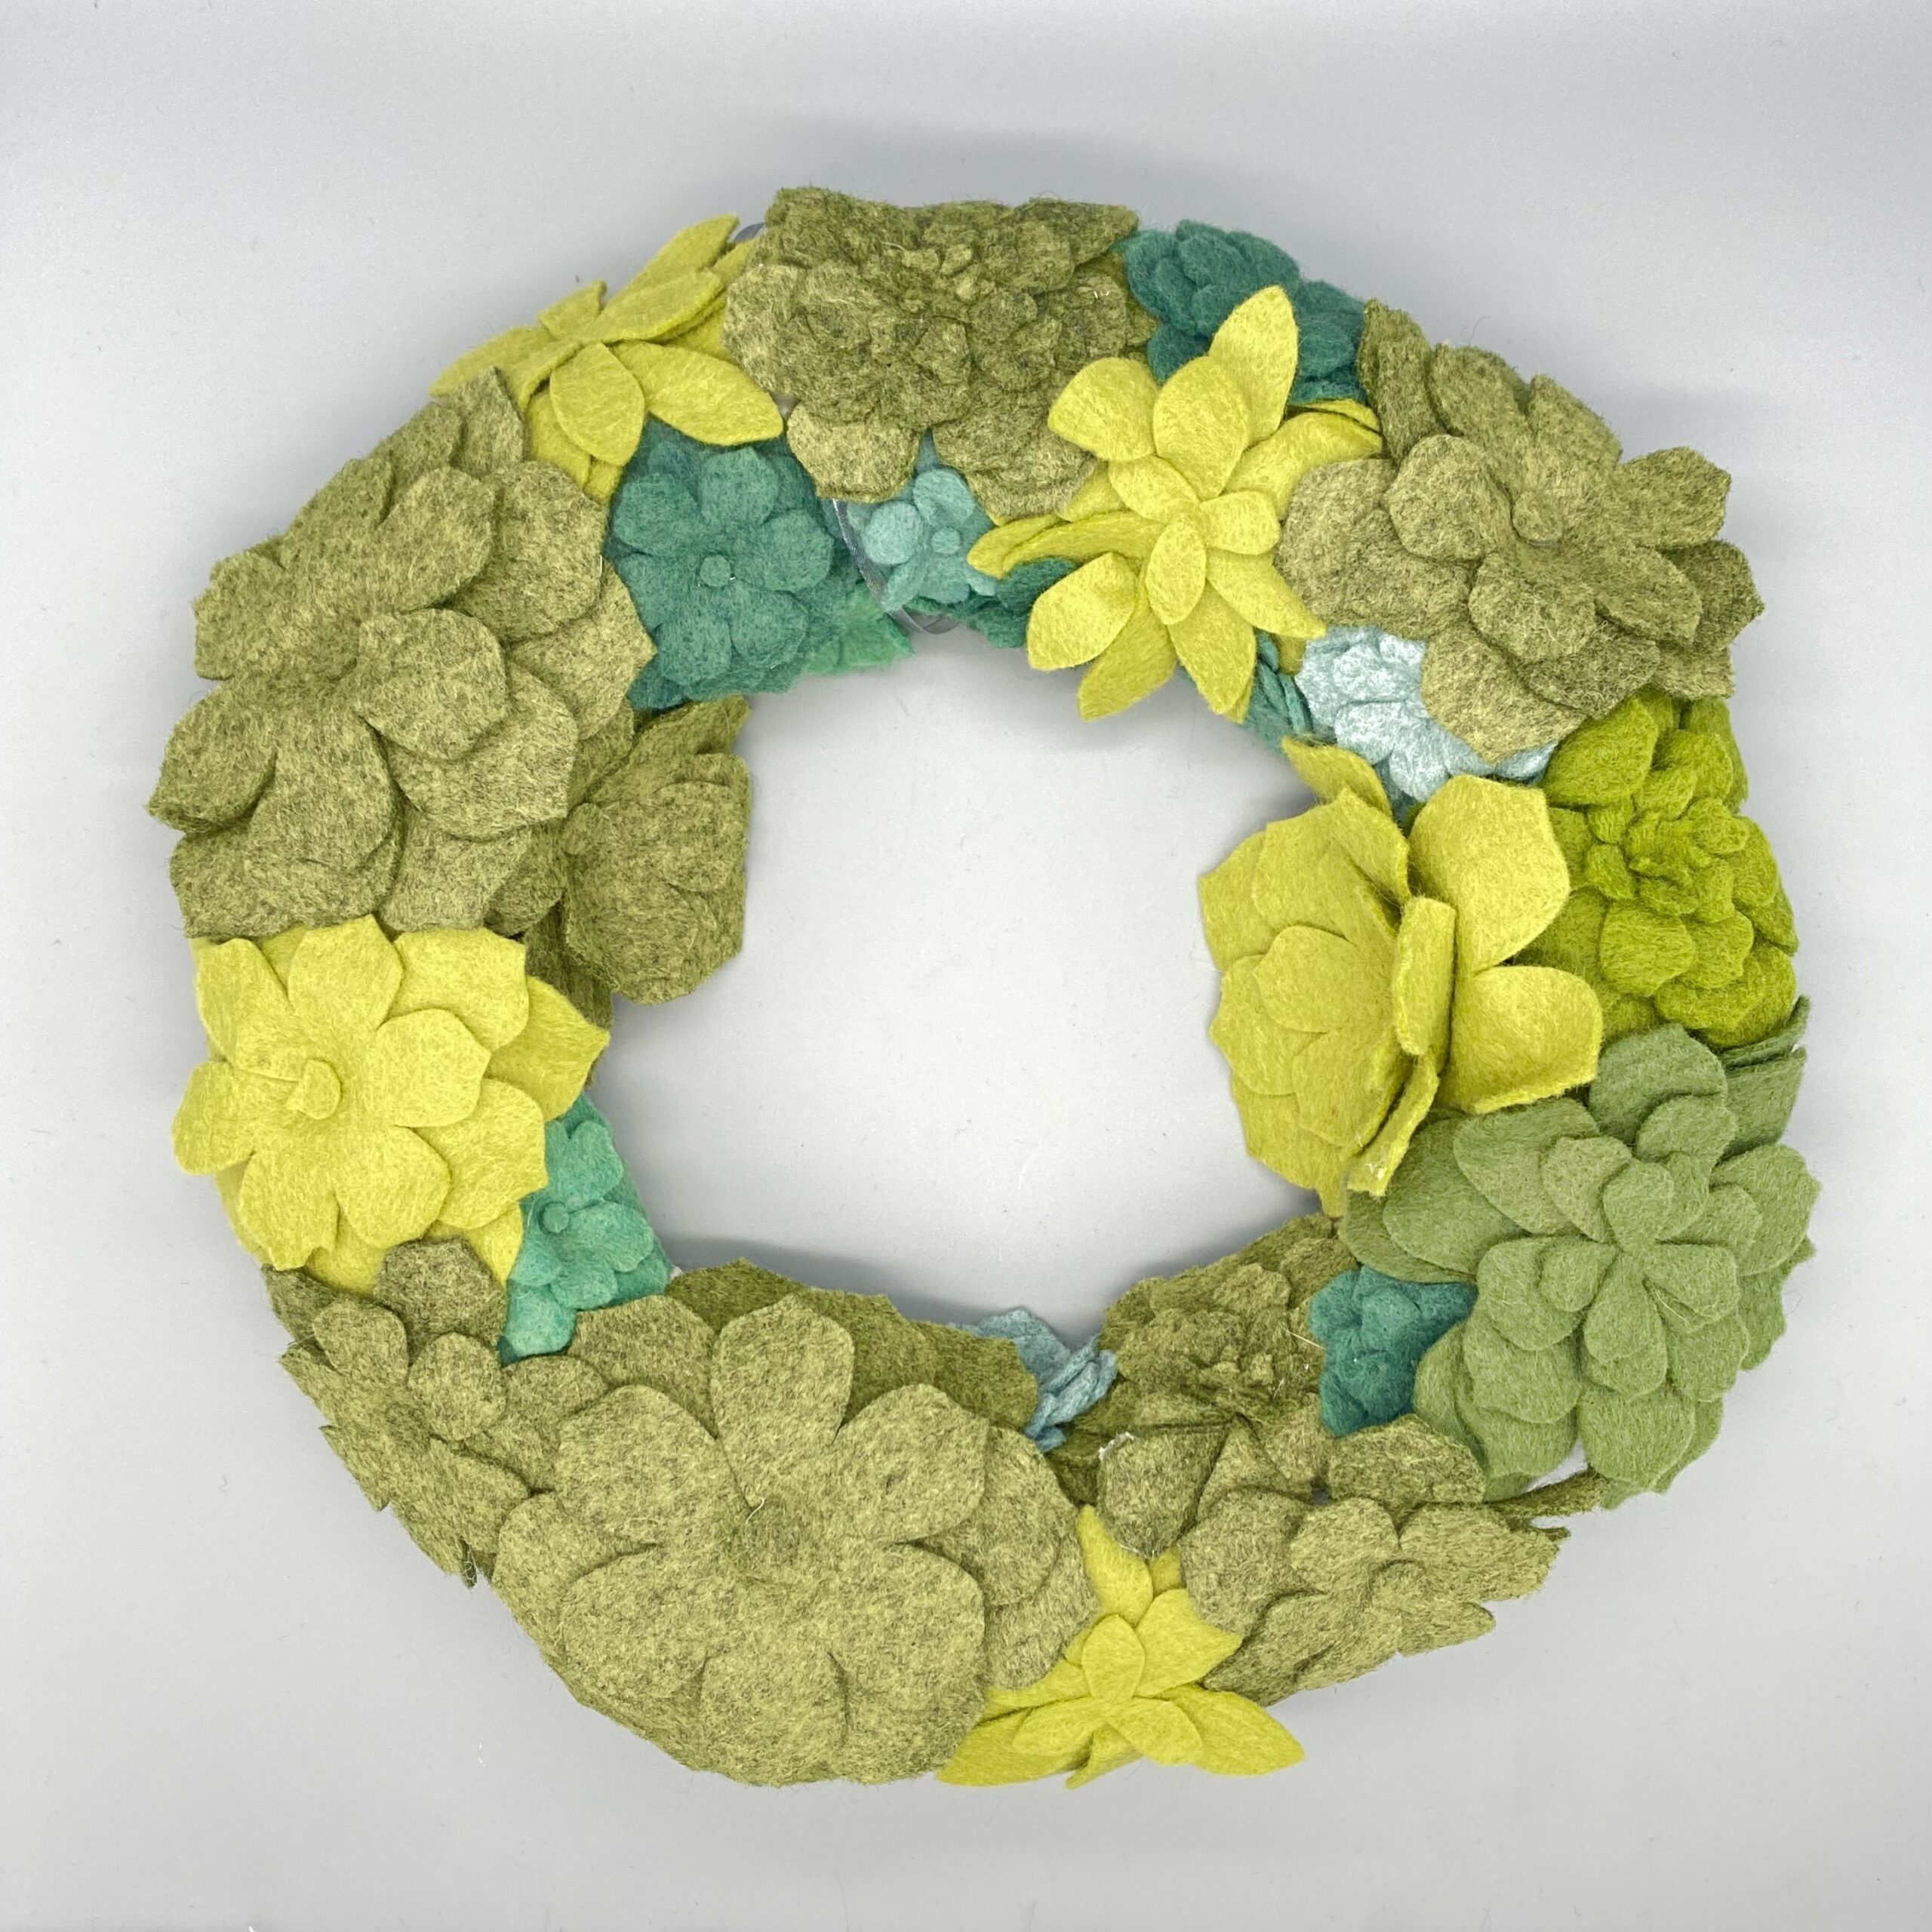 Featured image for “Succulent Wreath”